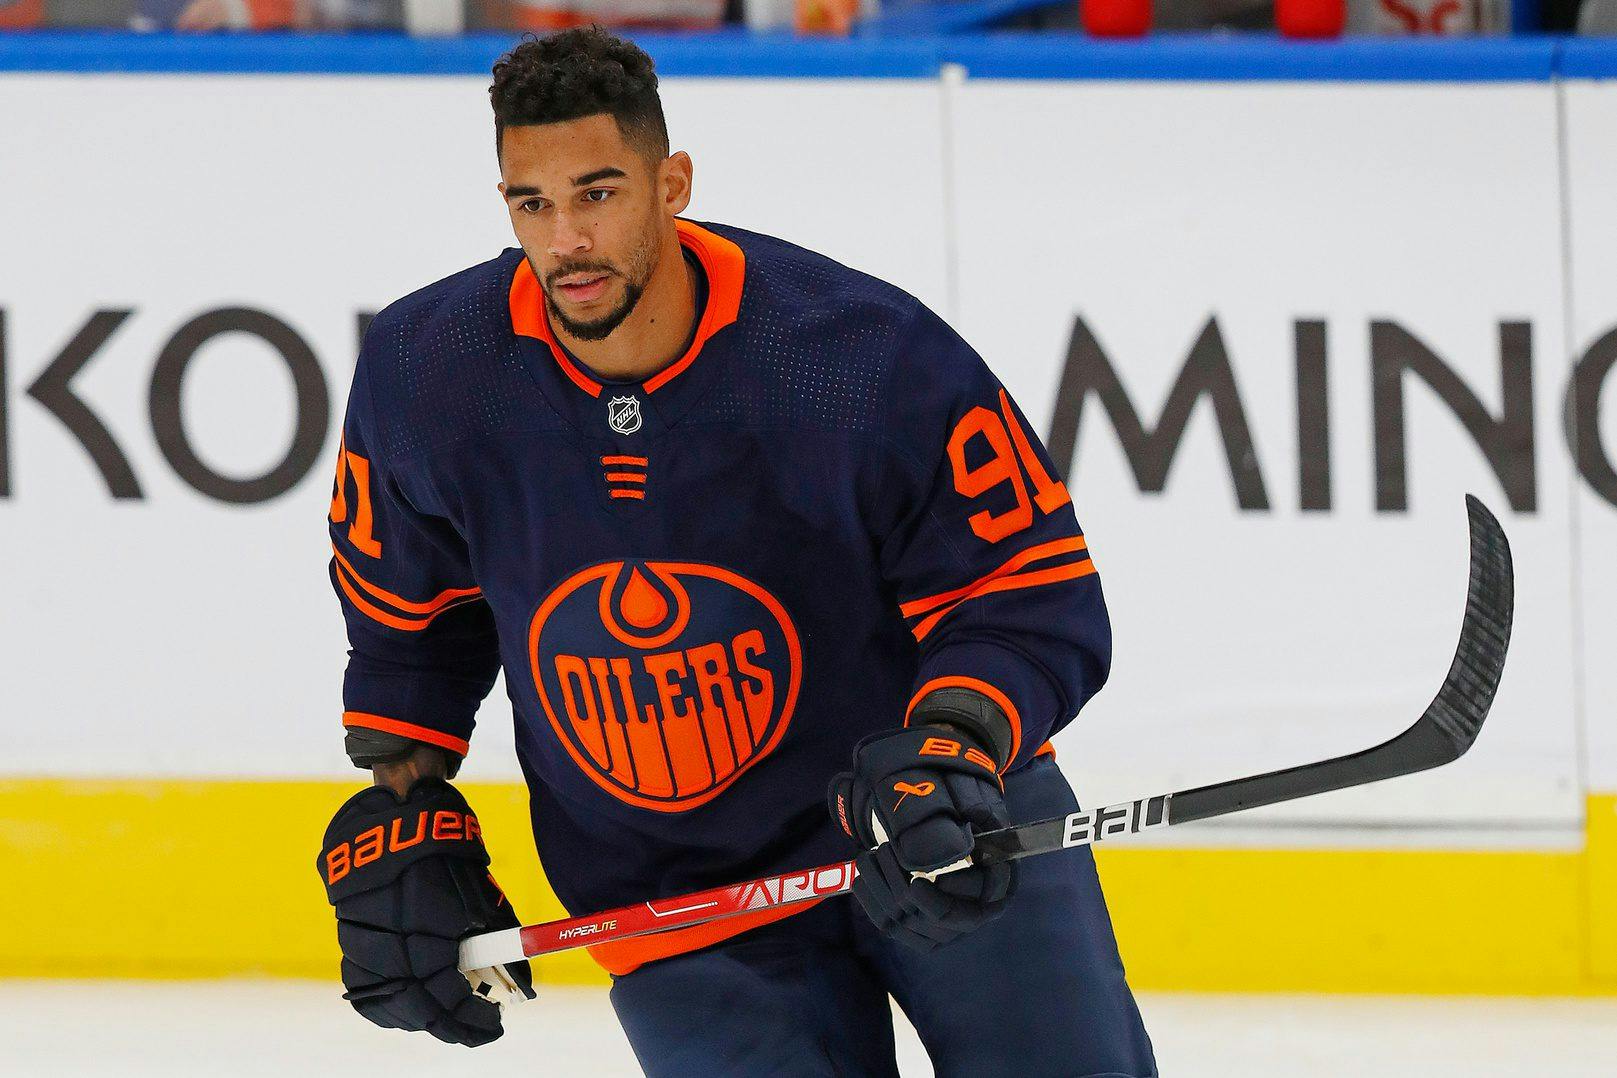 Evander Kane 'Sincerely Grateful' After Suffering Scary Injury